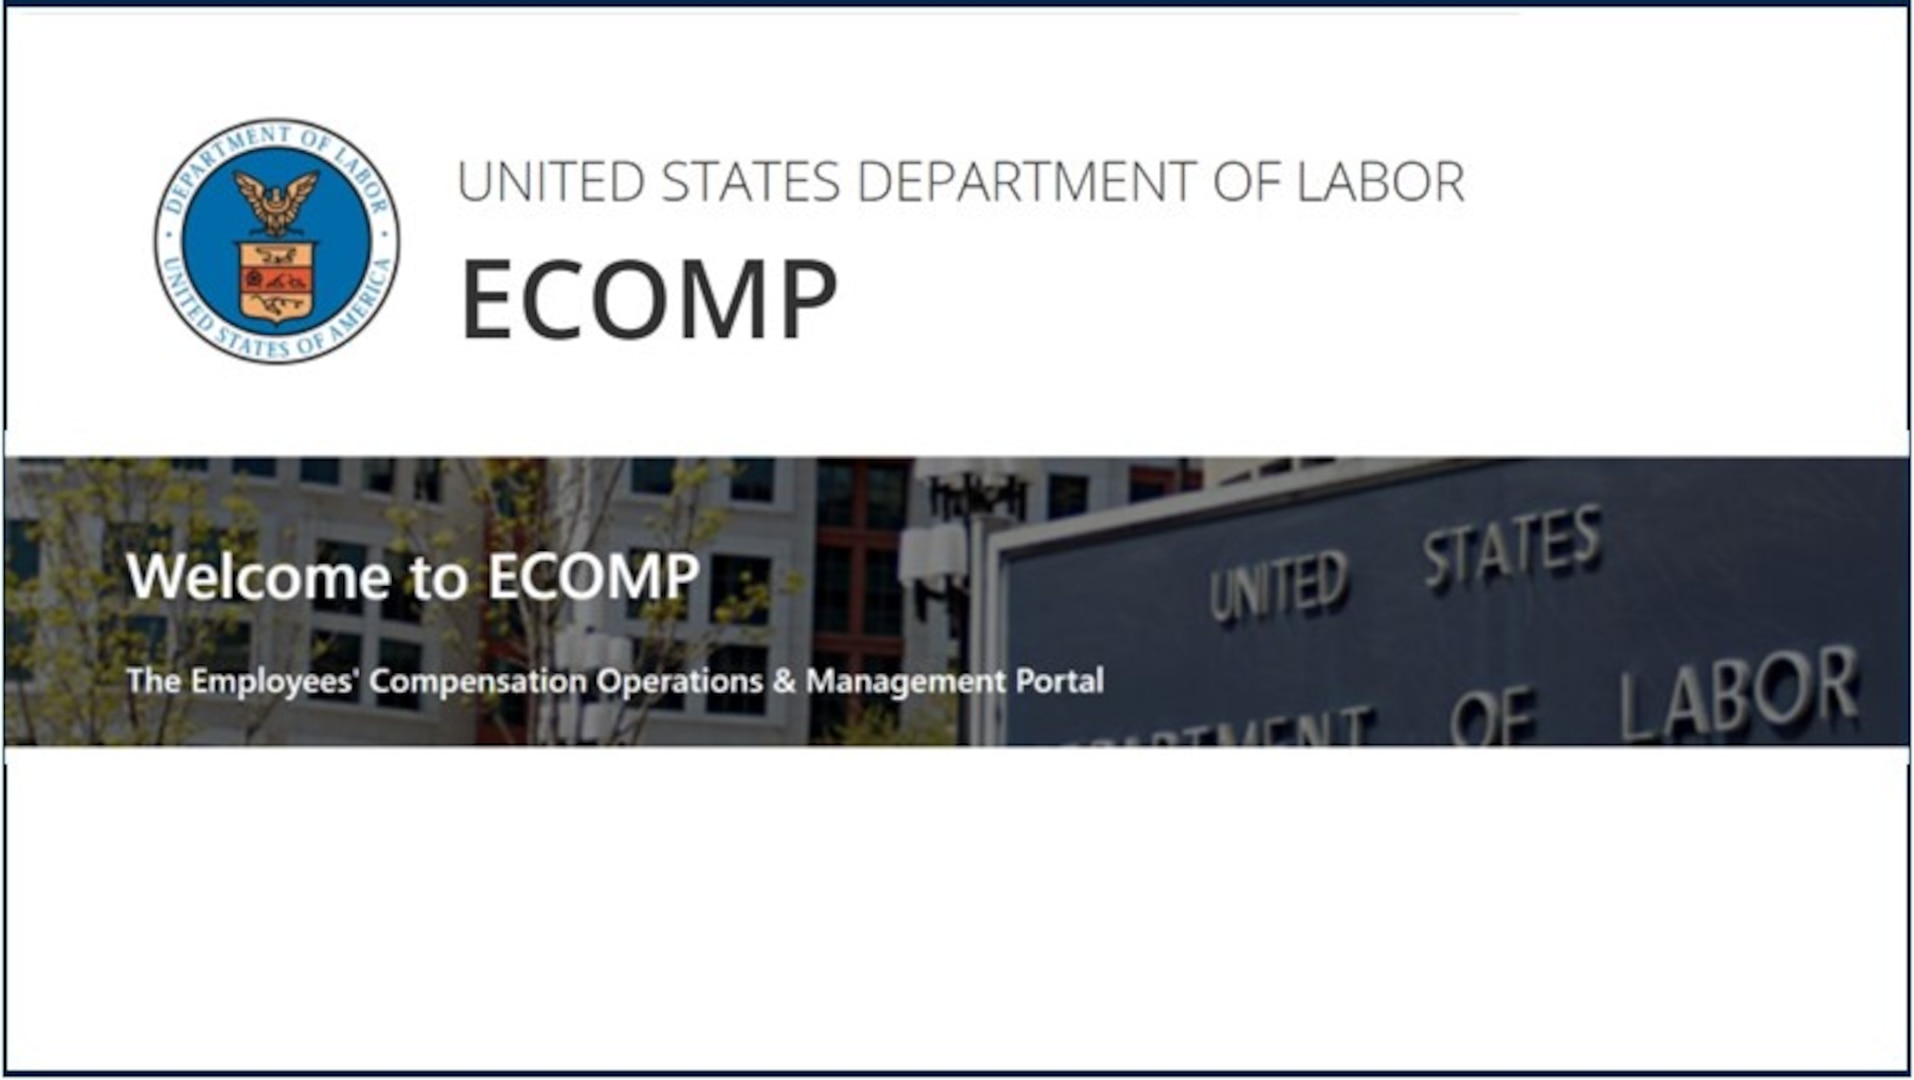 a screenshot of the Department of Labor Employees' Compensation Operations & Management Portal